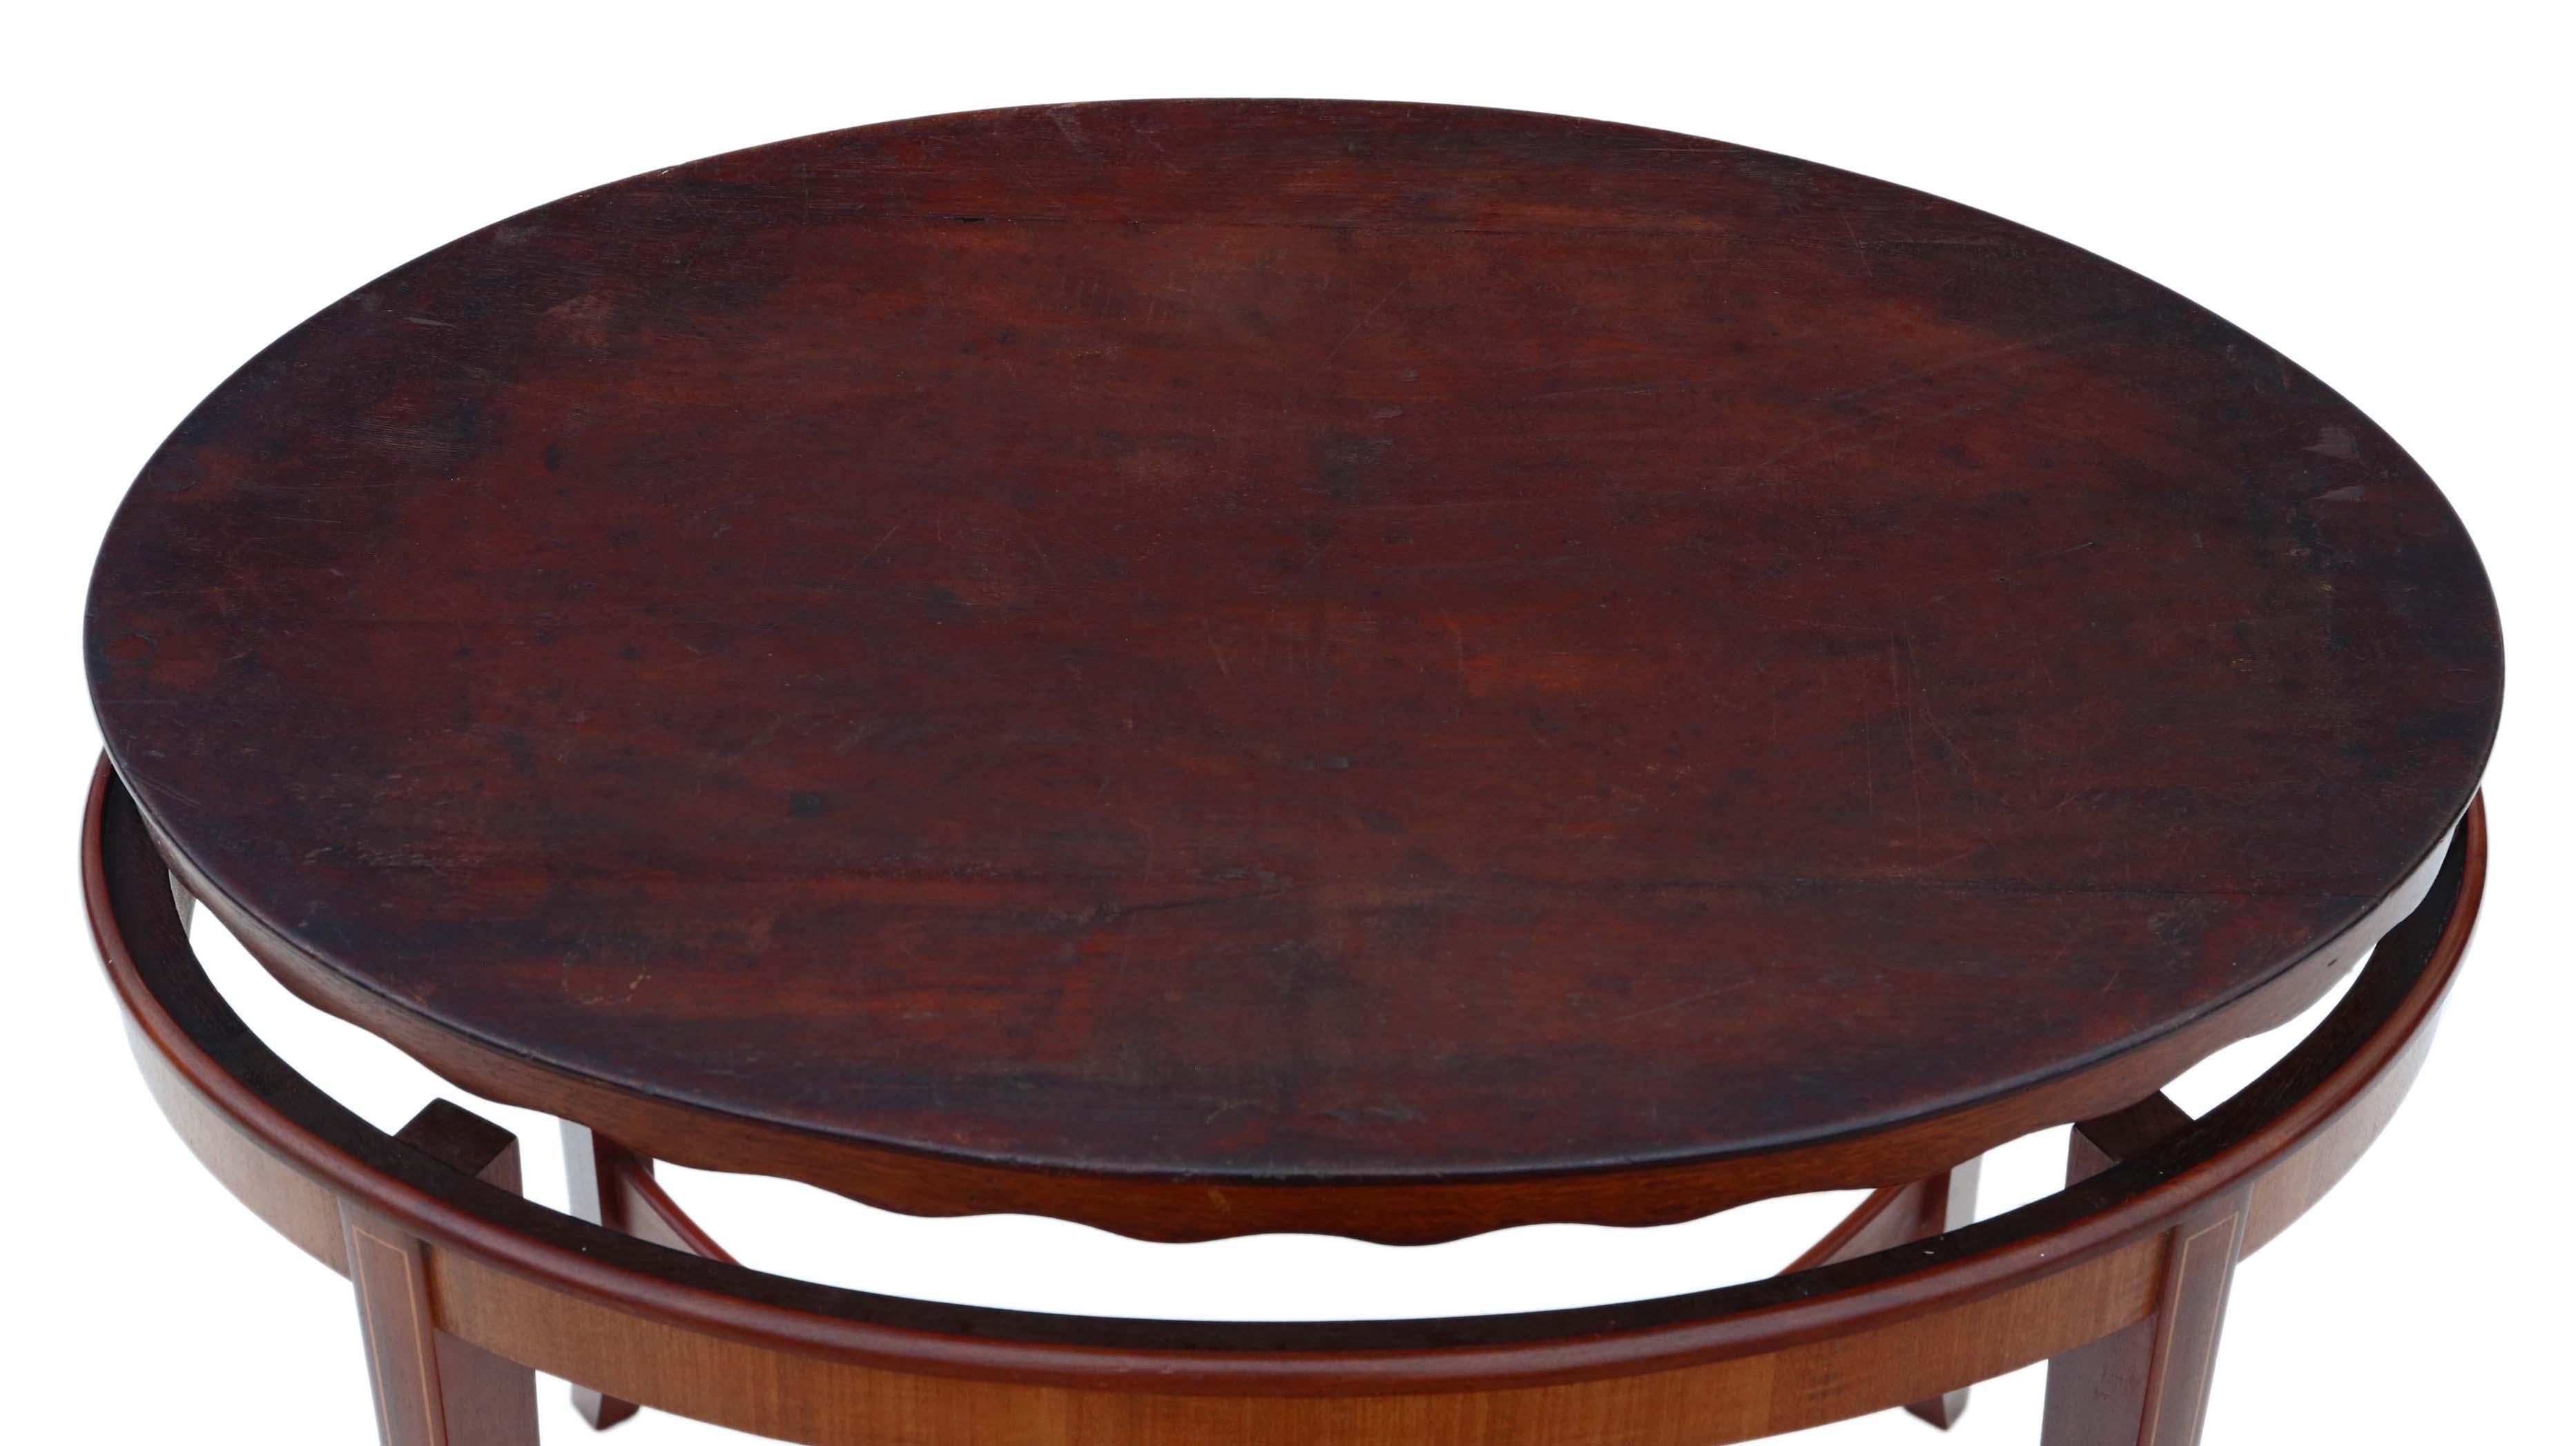 Antique Edwardian Mahogany and Satin Walnut Tray on Stand Coffee Table 1